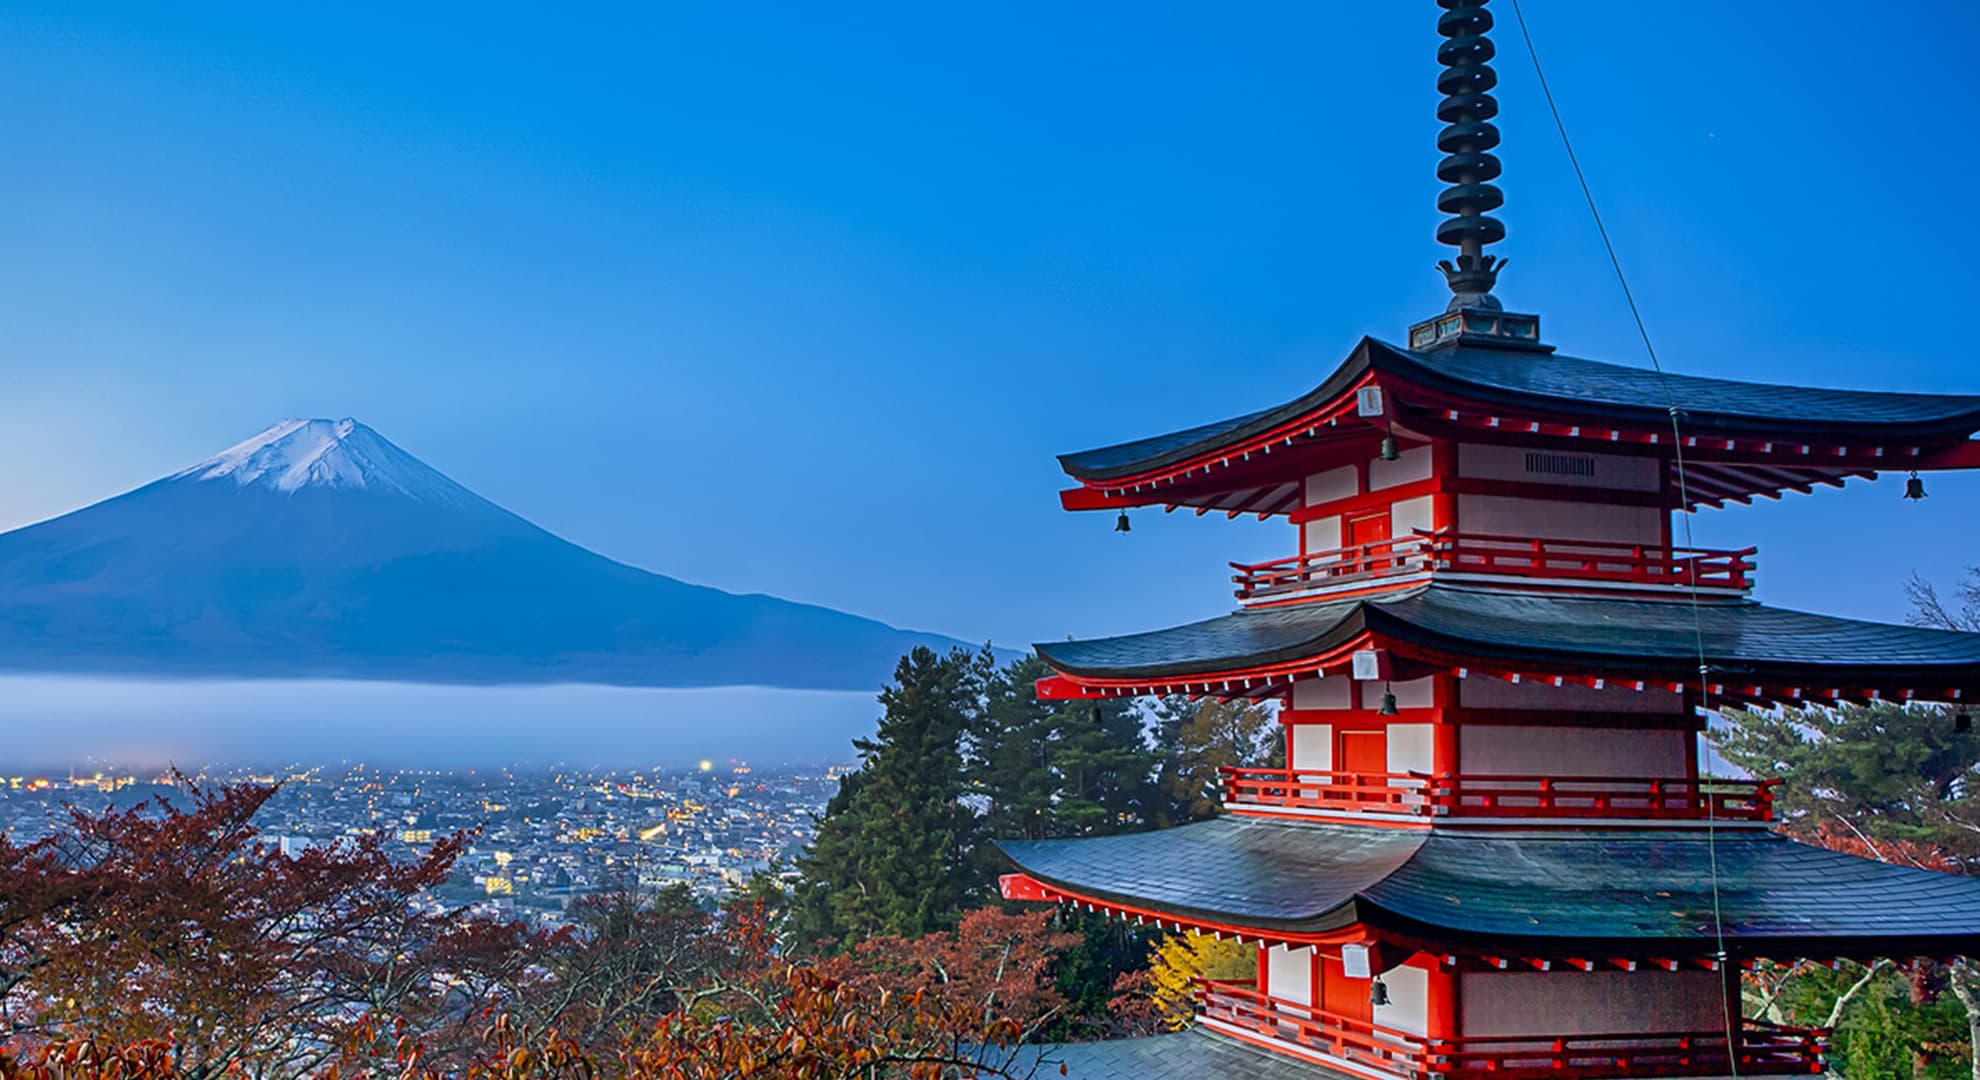 Mount Fuji with Japanese building